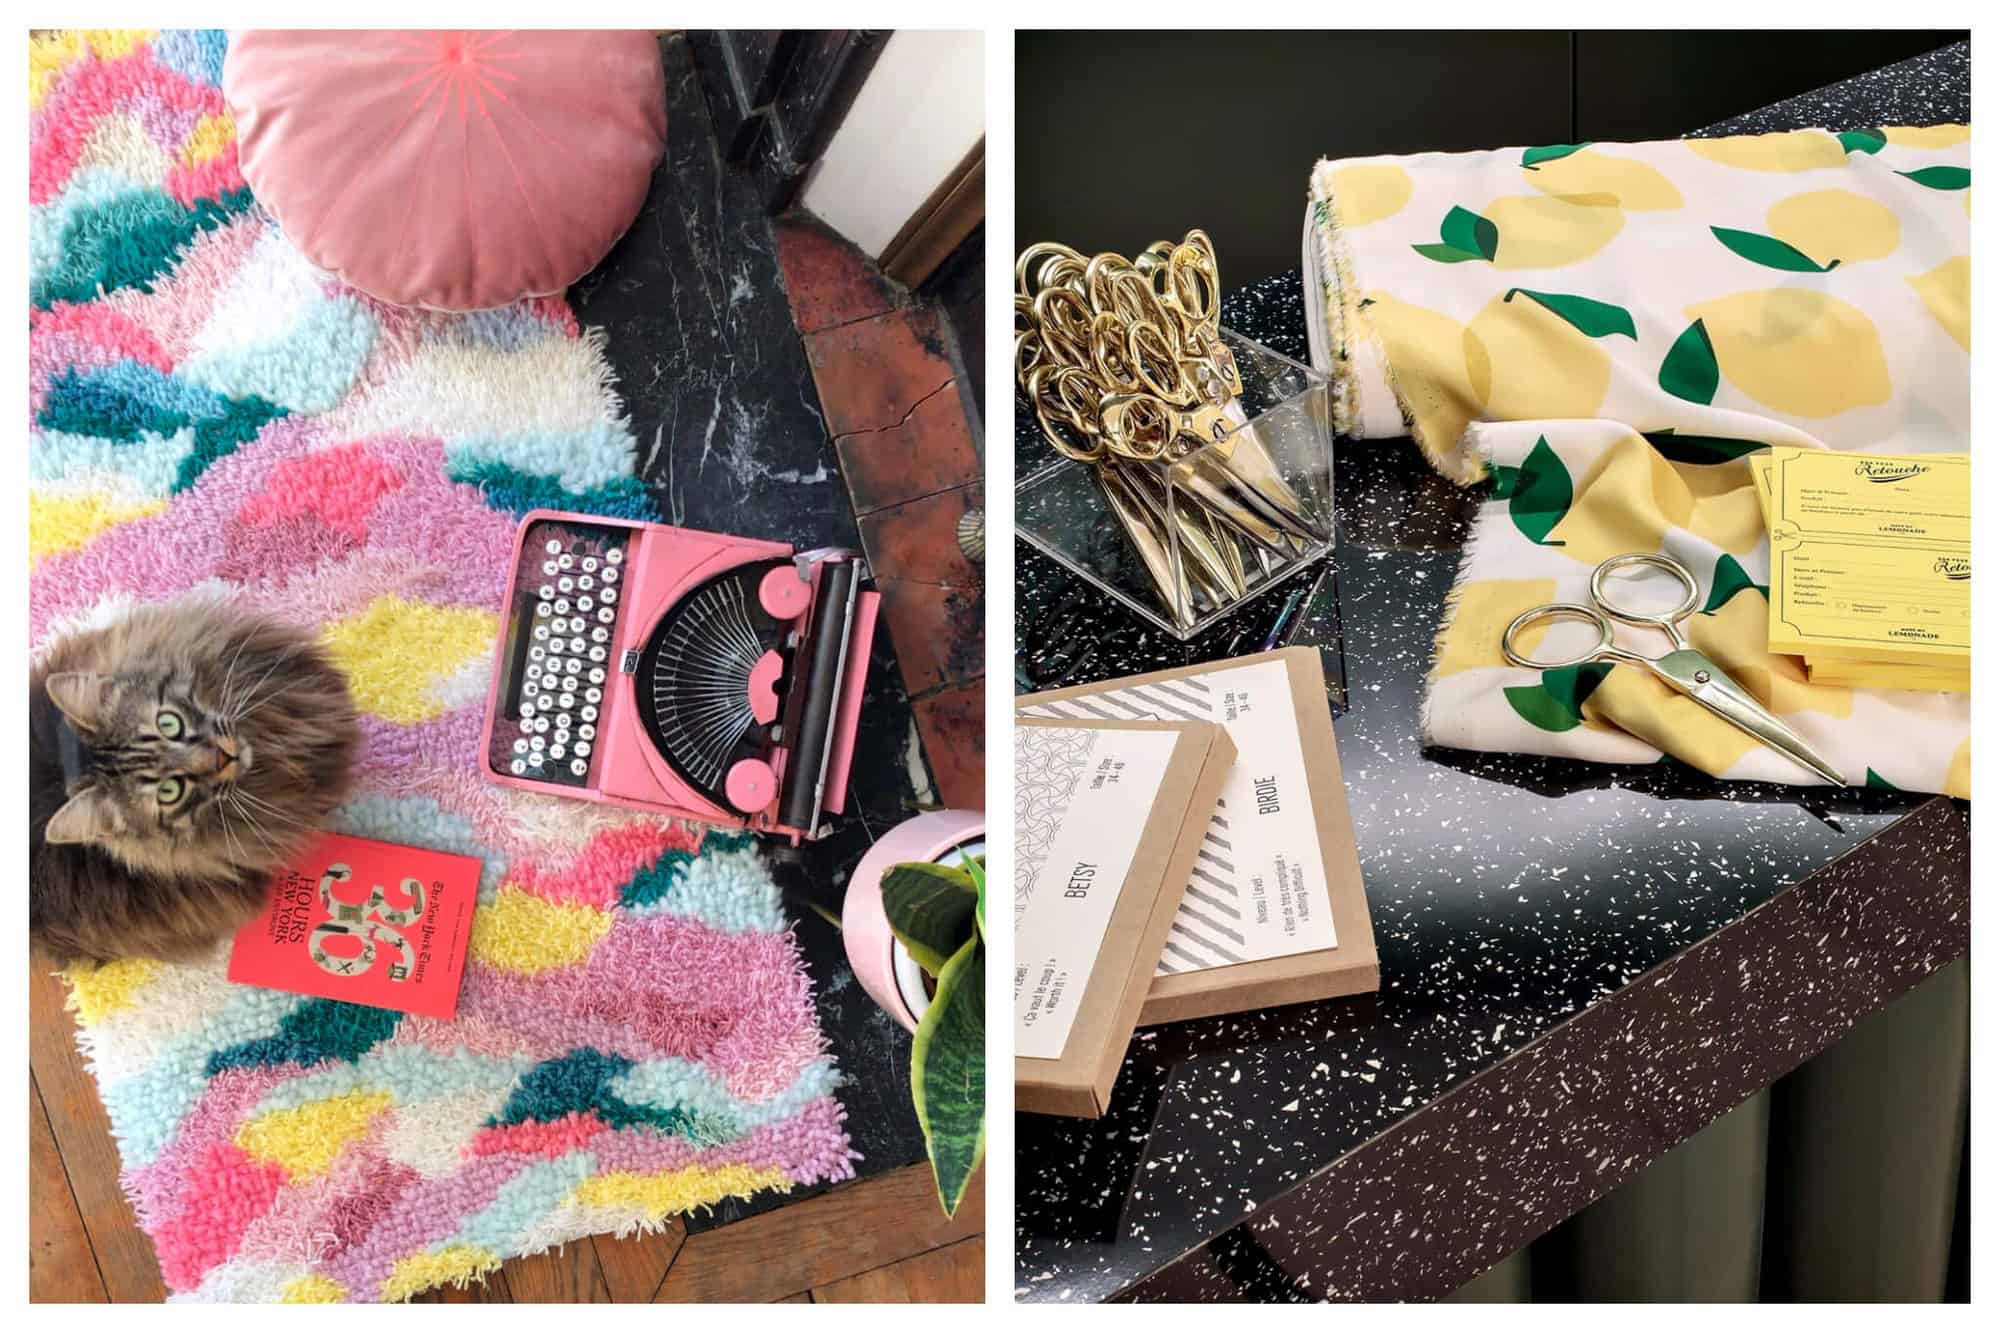 Left: an aerial view of a cat looking up at the camera, a bright multi colored throw rug, a pink pillow, a bright pink typewriter, and a house plant. Right: A large roll of fabric with yellow lemons with green leaves on it. There is a small plastic container with several gold scissors in it. There is a larger pair of silver scissors on the piece of fabric.